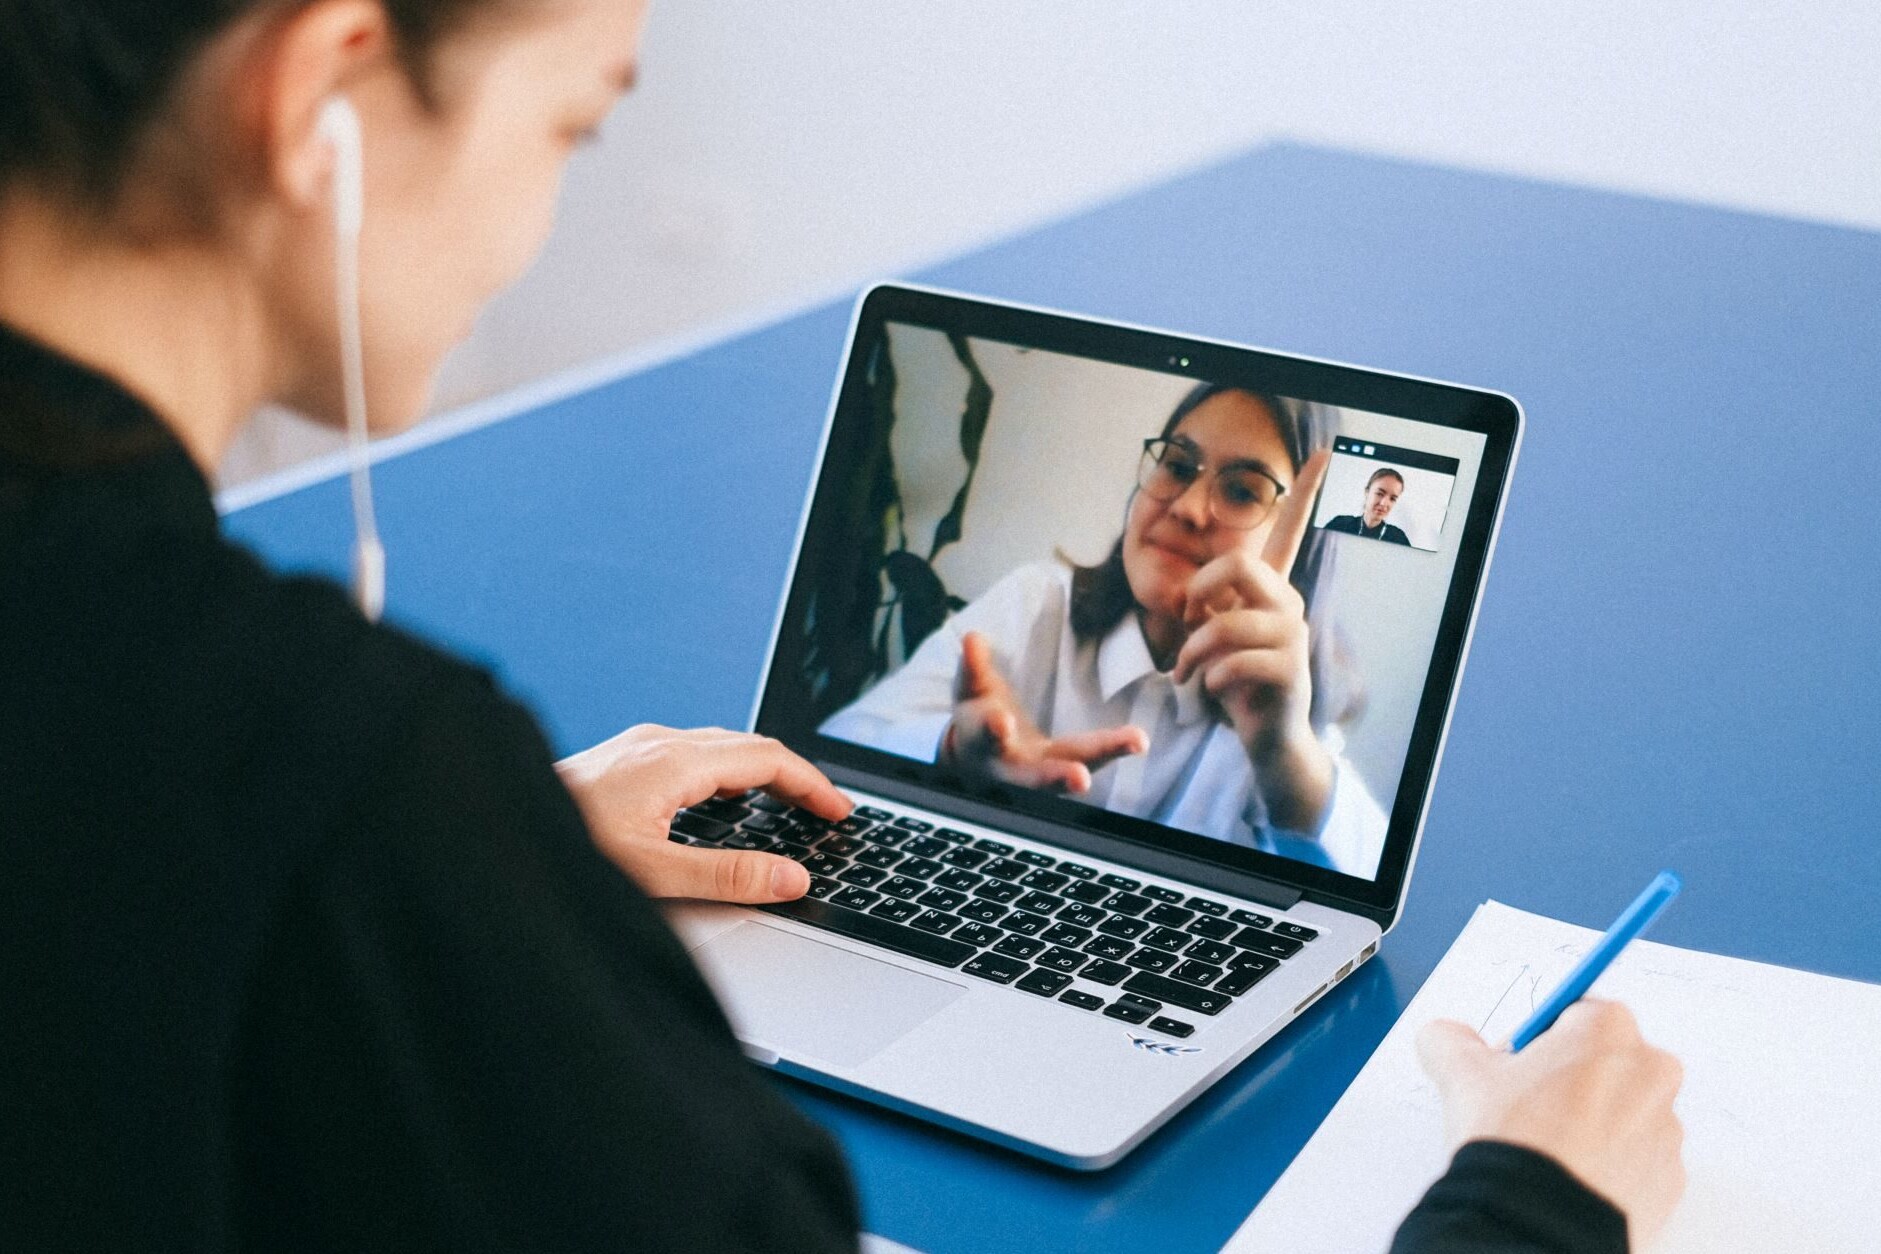 A woman sitting out of focus having a conversation with another woman via video chat on her laptop.